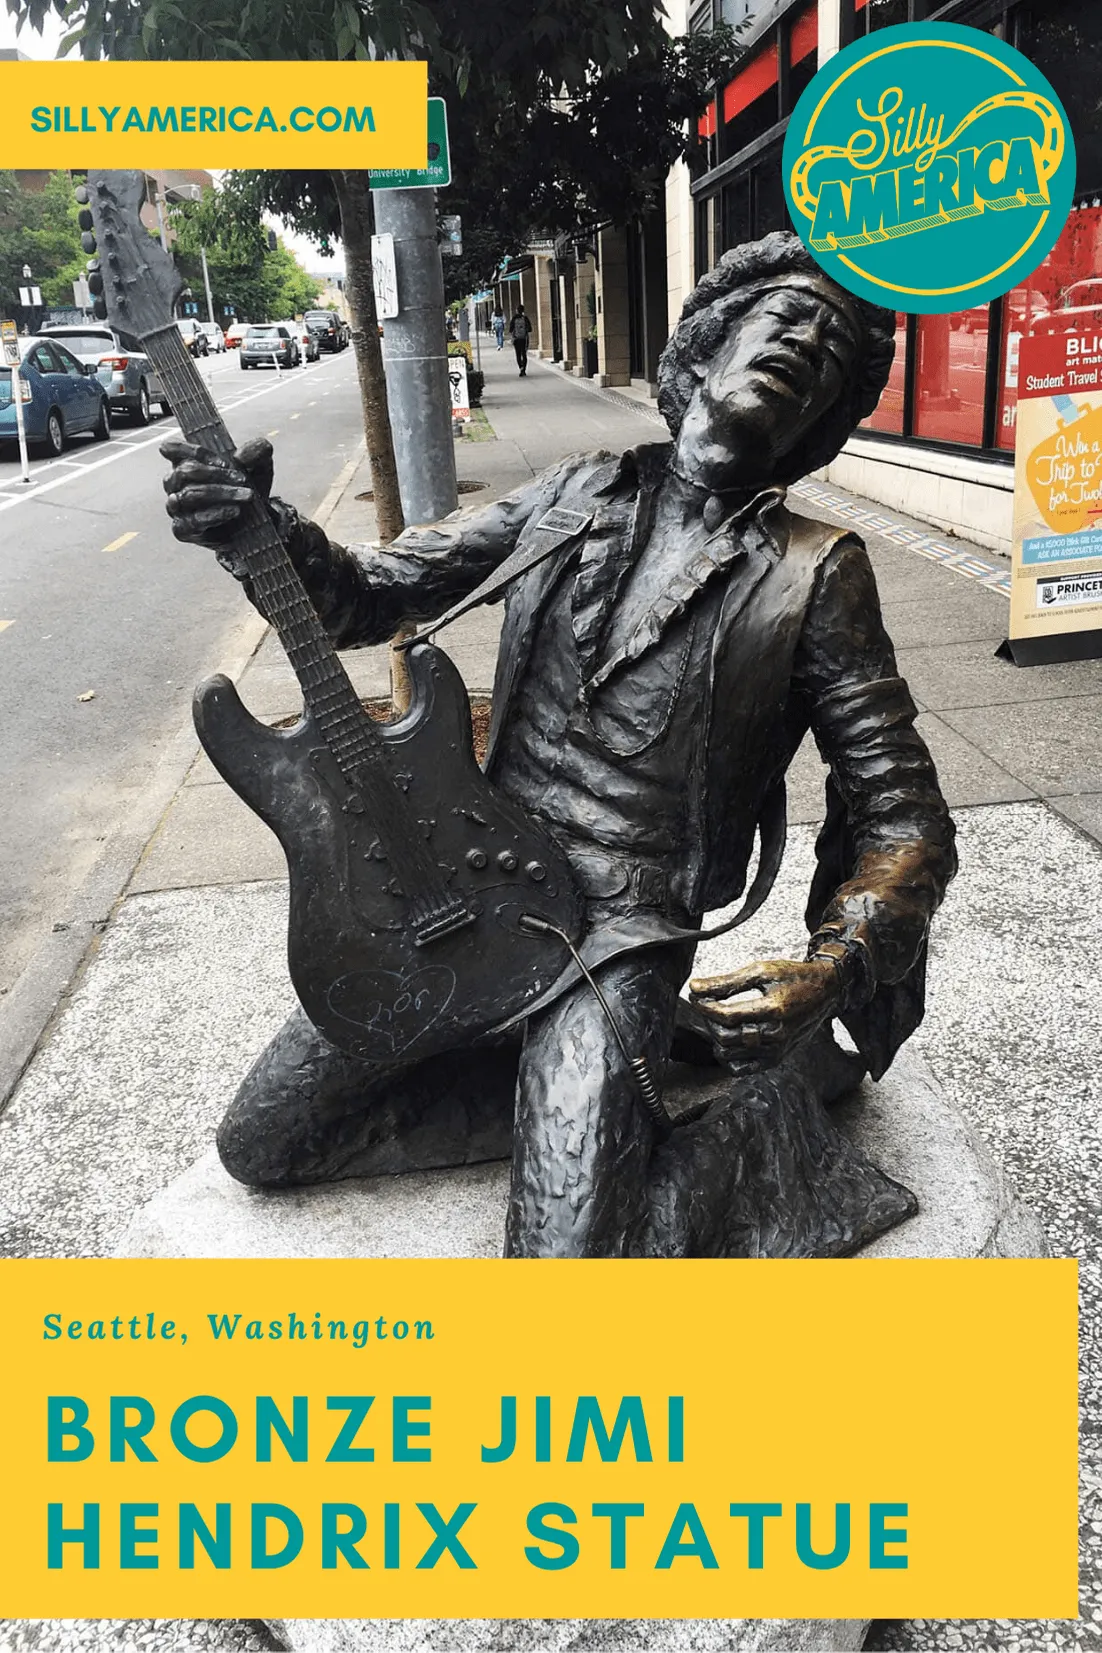 The Electric Lady Studio Guitar - the bronze Jimi Hendrix Statue in Seattle, Washington was unveiled in 1997 as a tribute to the guitarist and rock legend. Visit this Seattle tourist attraction for photography ops on a Washington road trip or Seattle vacation.  #WashingtonRoadsideAttractions #WashingtonRoadsideAttraction #RoadsideAttractions #RoadsideAttraction #RoadTrip #WashingtonRoadTrip #WashingtonRoadTripMap #WashingtonRoadTripBucketLists #WashingtonBucketList  #SeattleRoadTrip